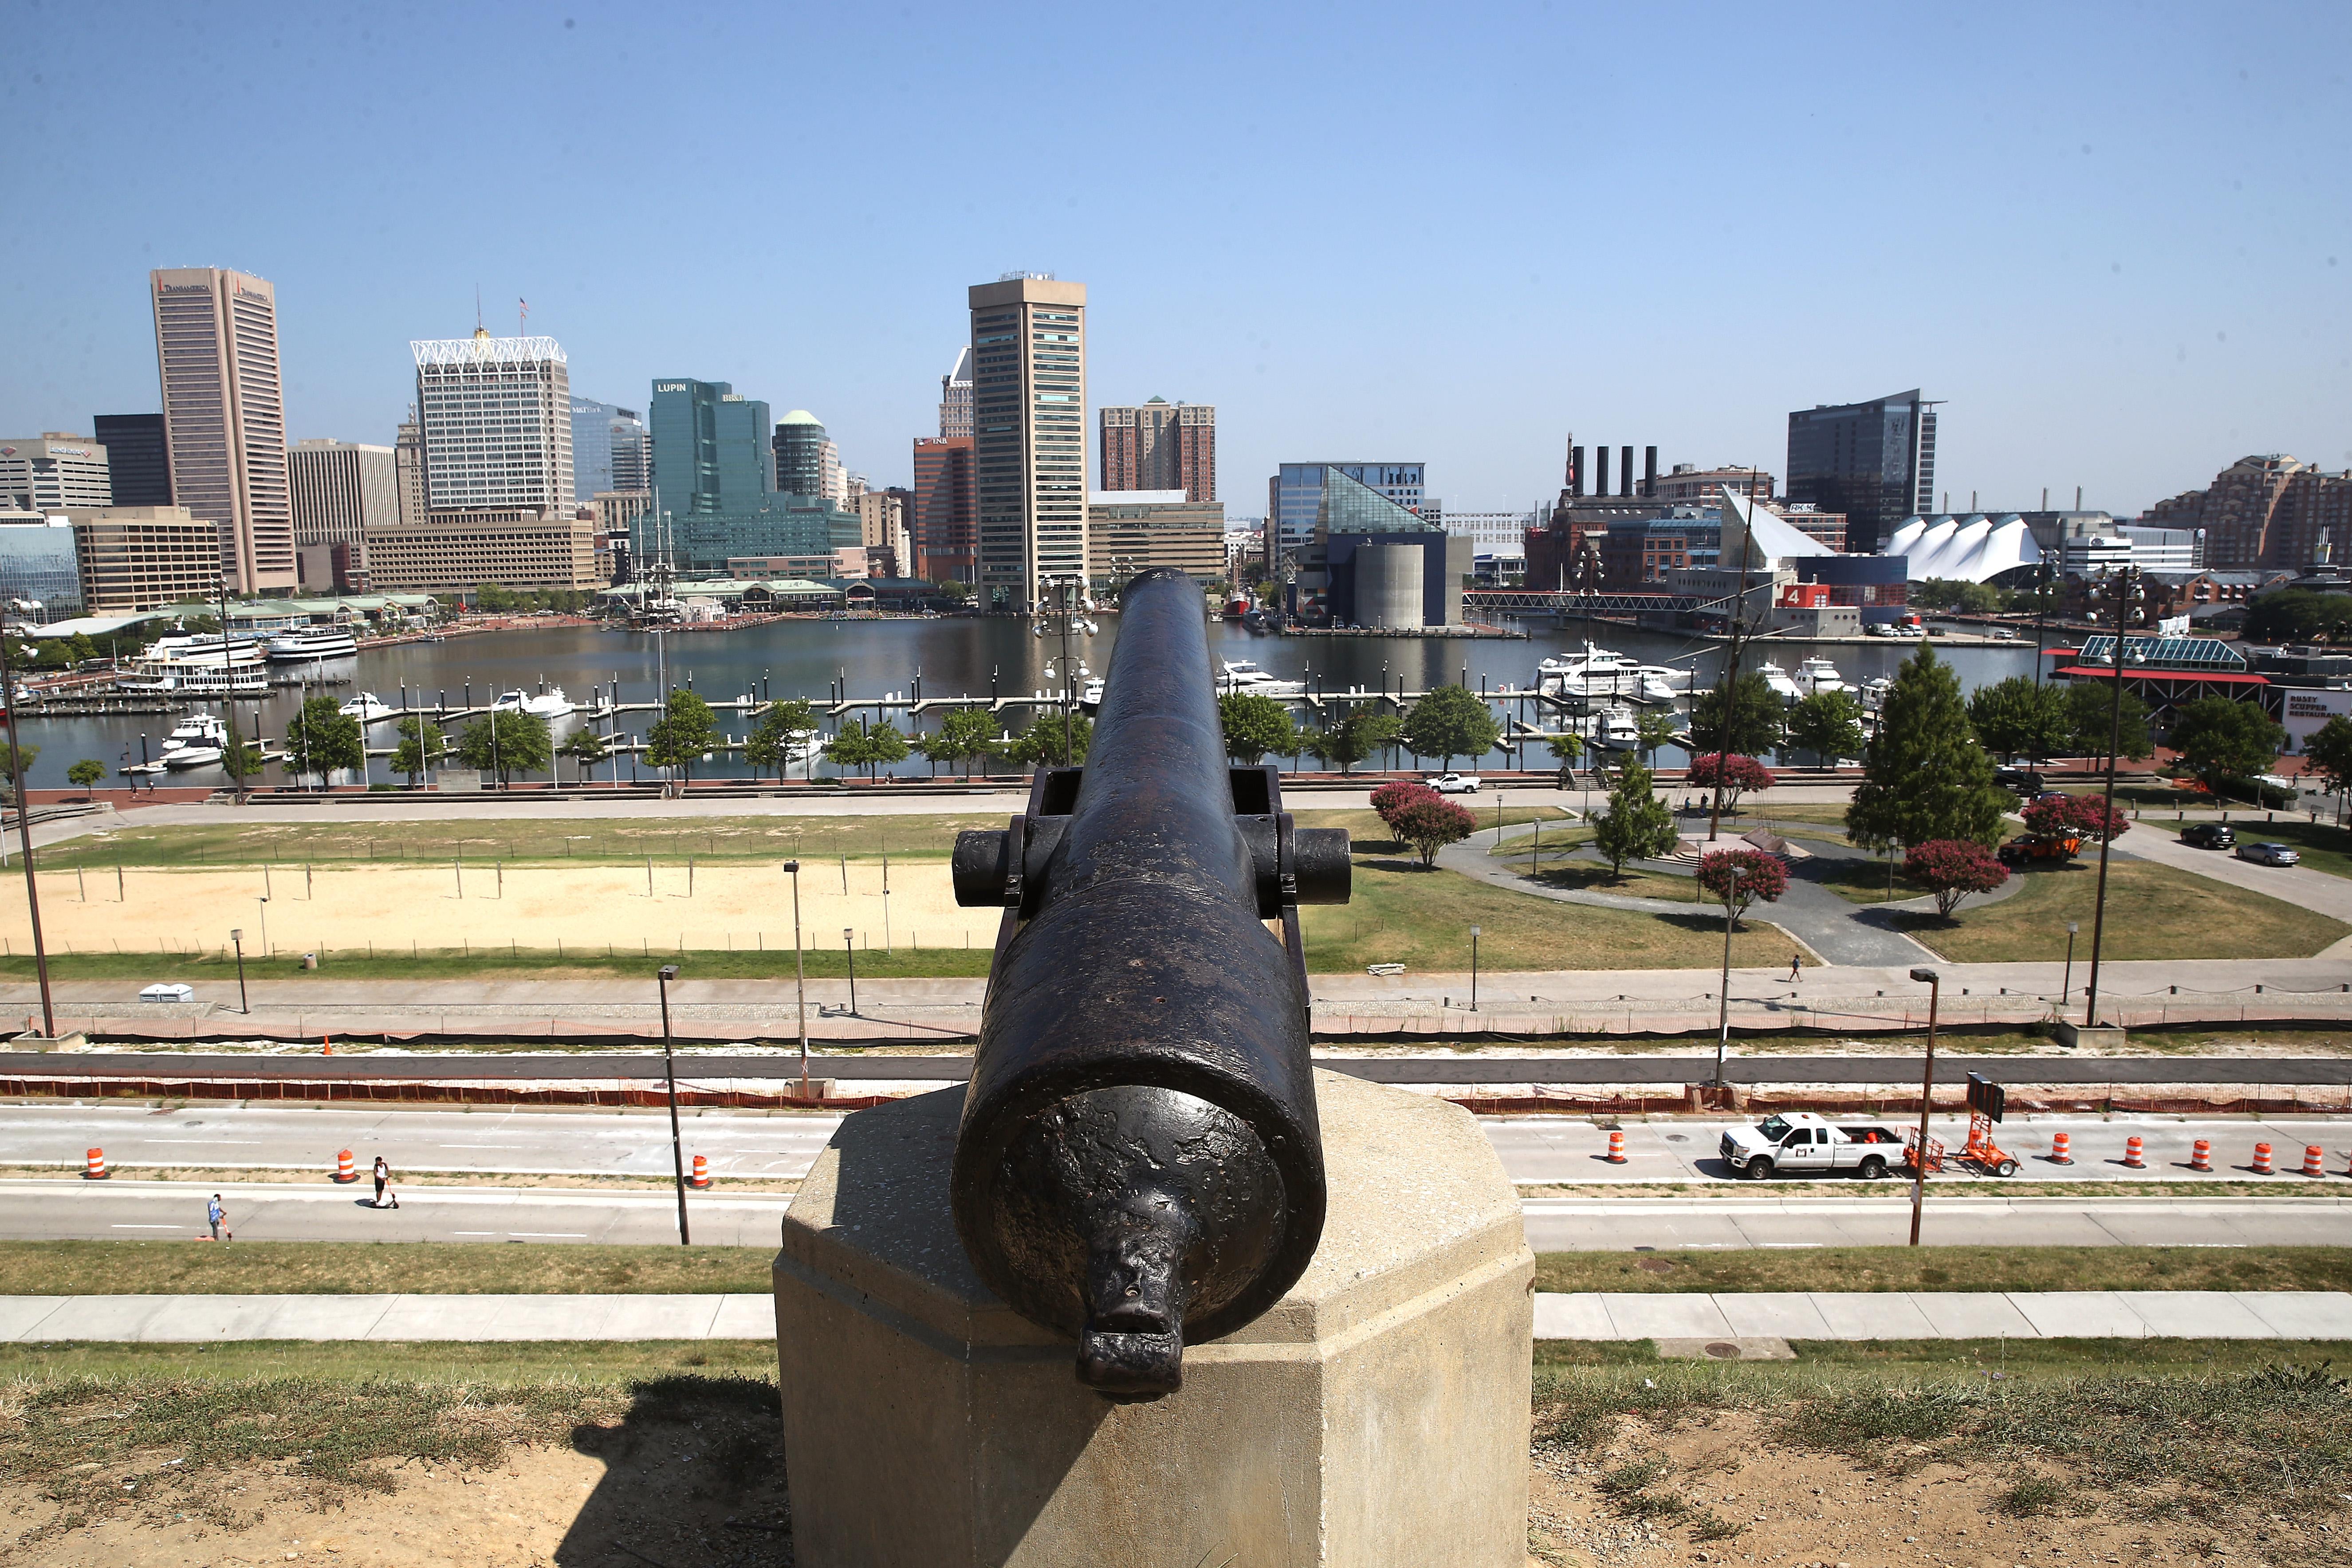 A cannon pointed at the Baltimore skyline on a sunny, cloudless day